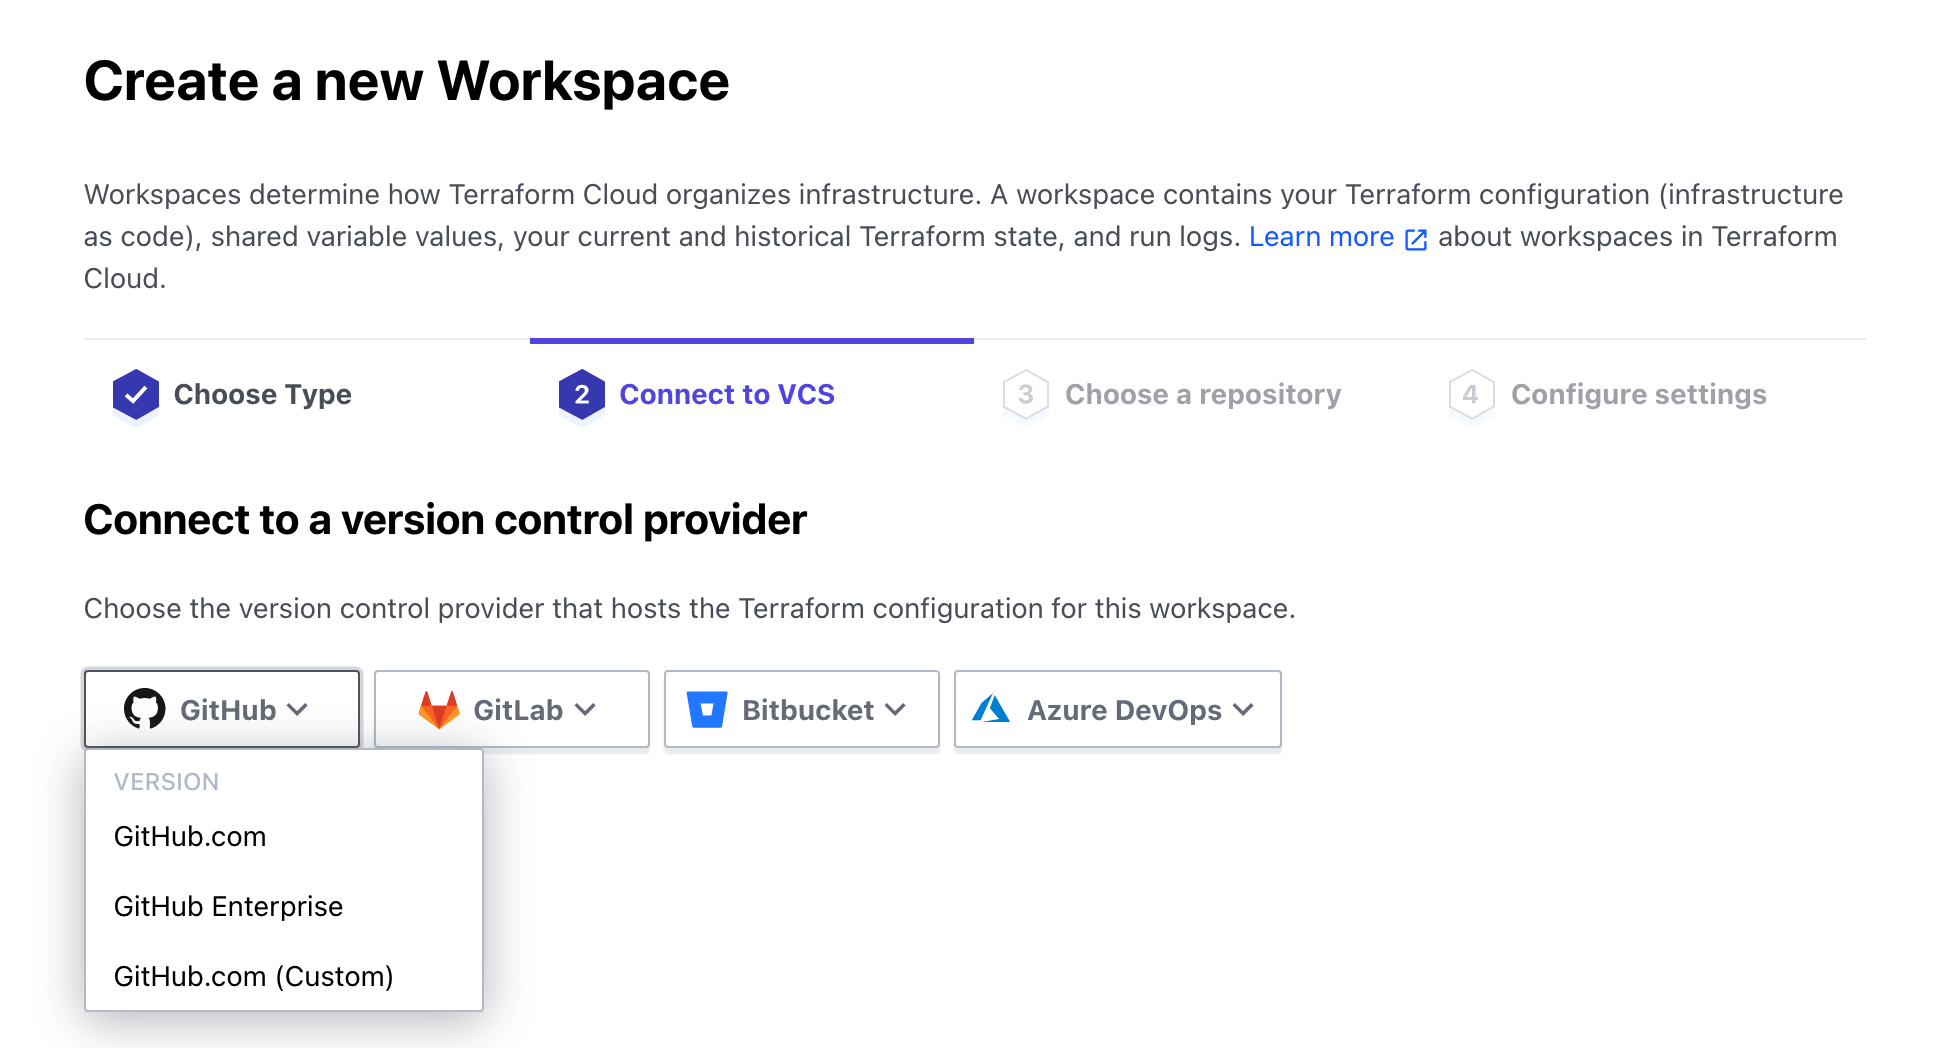 Workspace connect to VCS